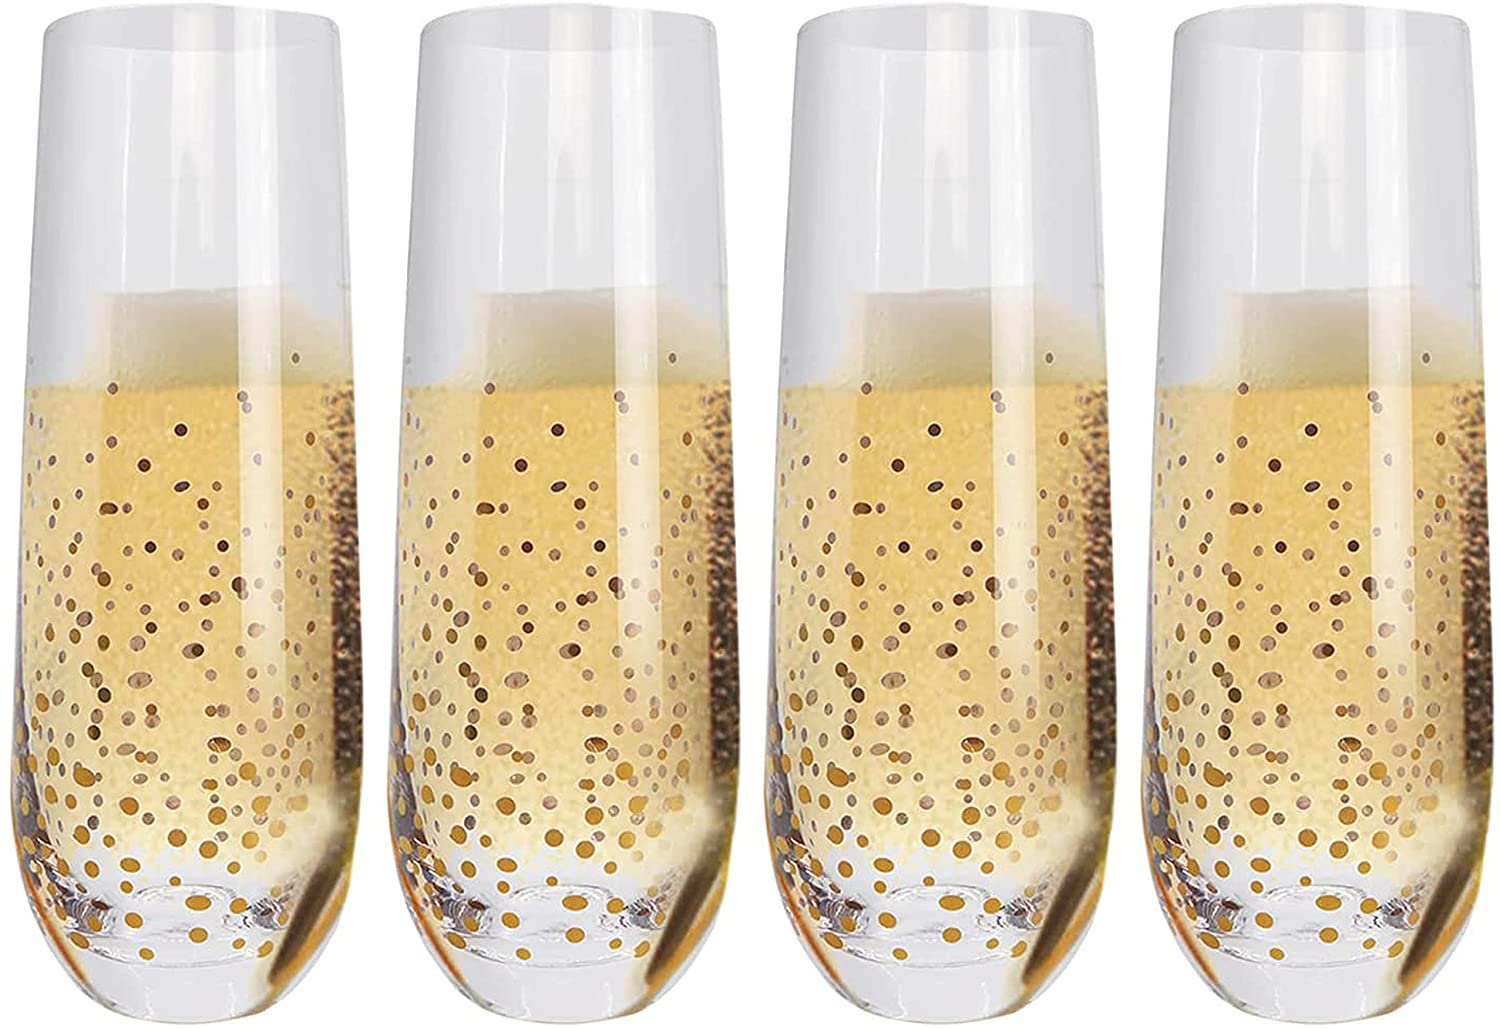 https://www.pnwwinelife.com/wp-content/uploads/2021/11/stemless-champagne-glasses-with-dots.jpg